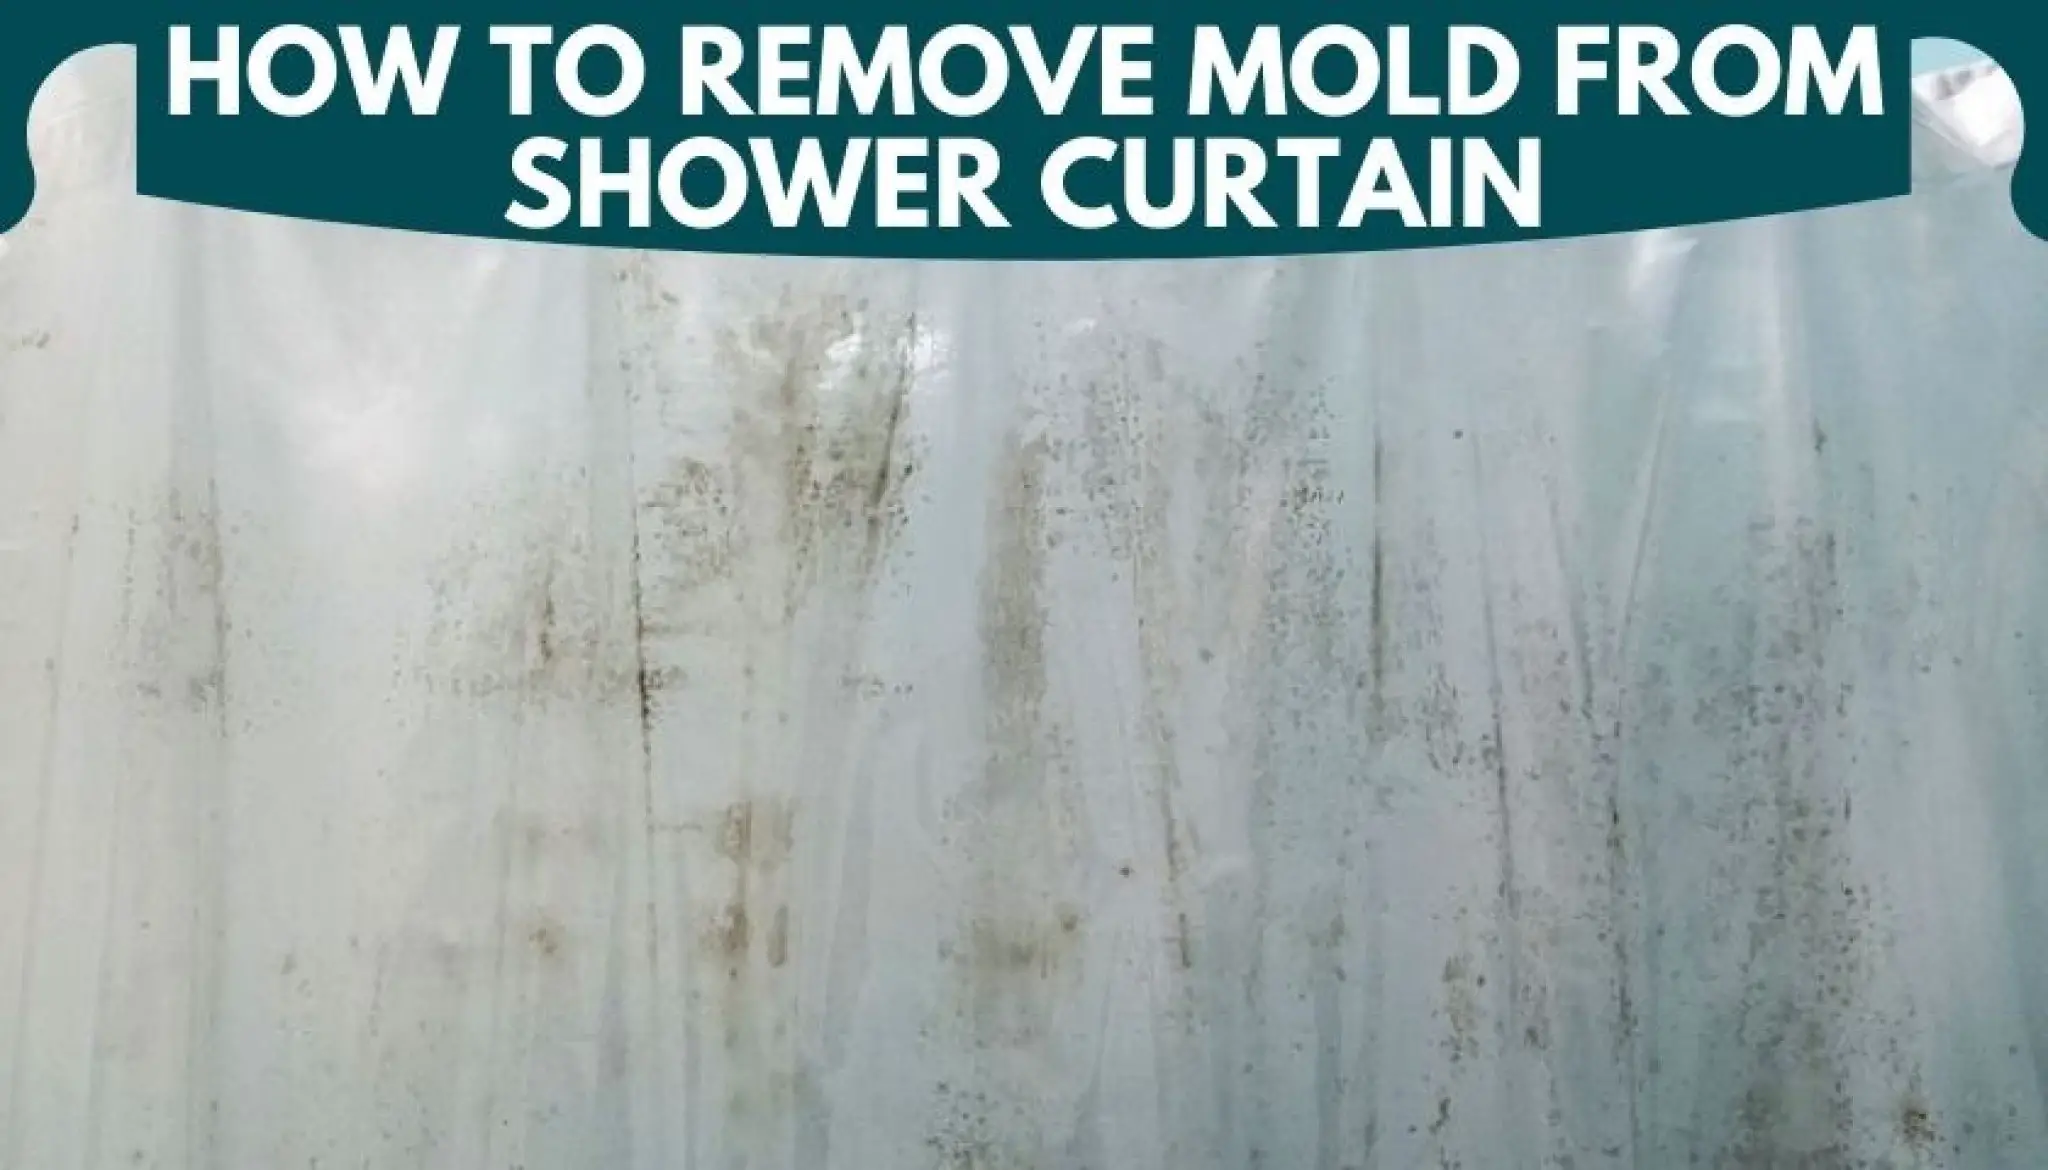 How to Remove Mold from Shower Curtain